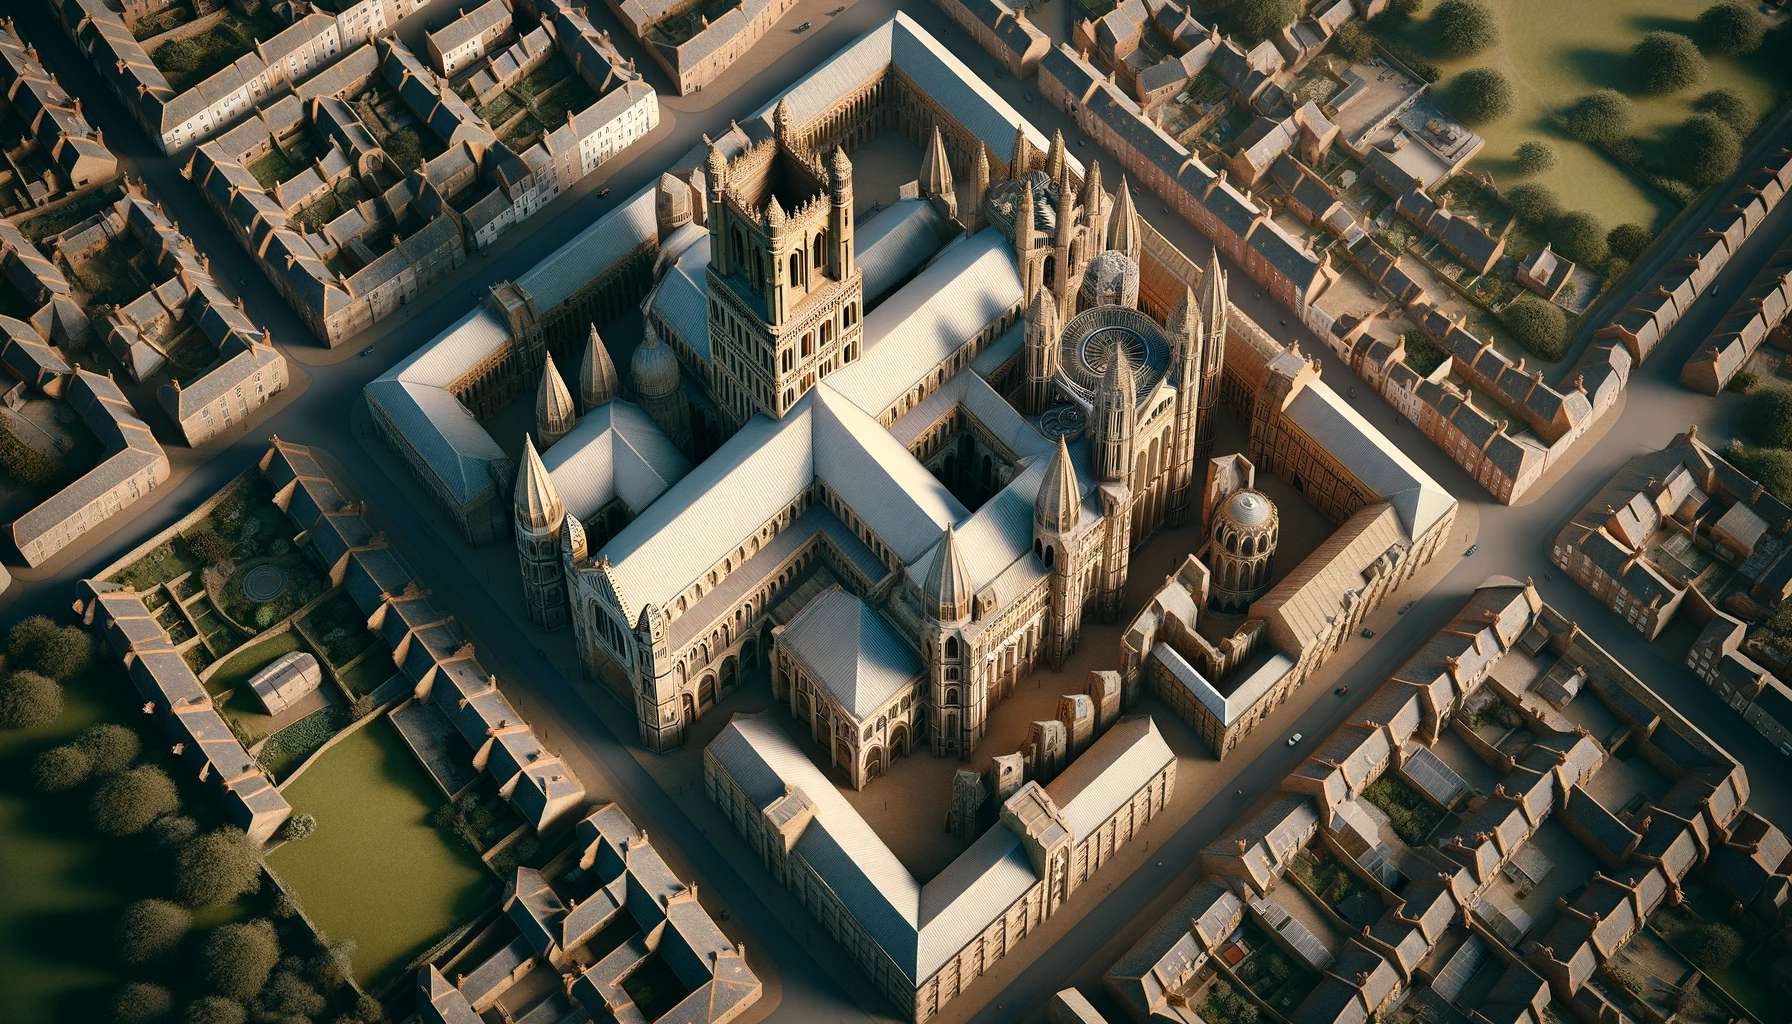 How Big Is Ely Cathedral